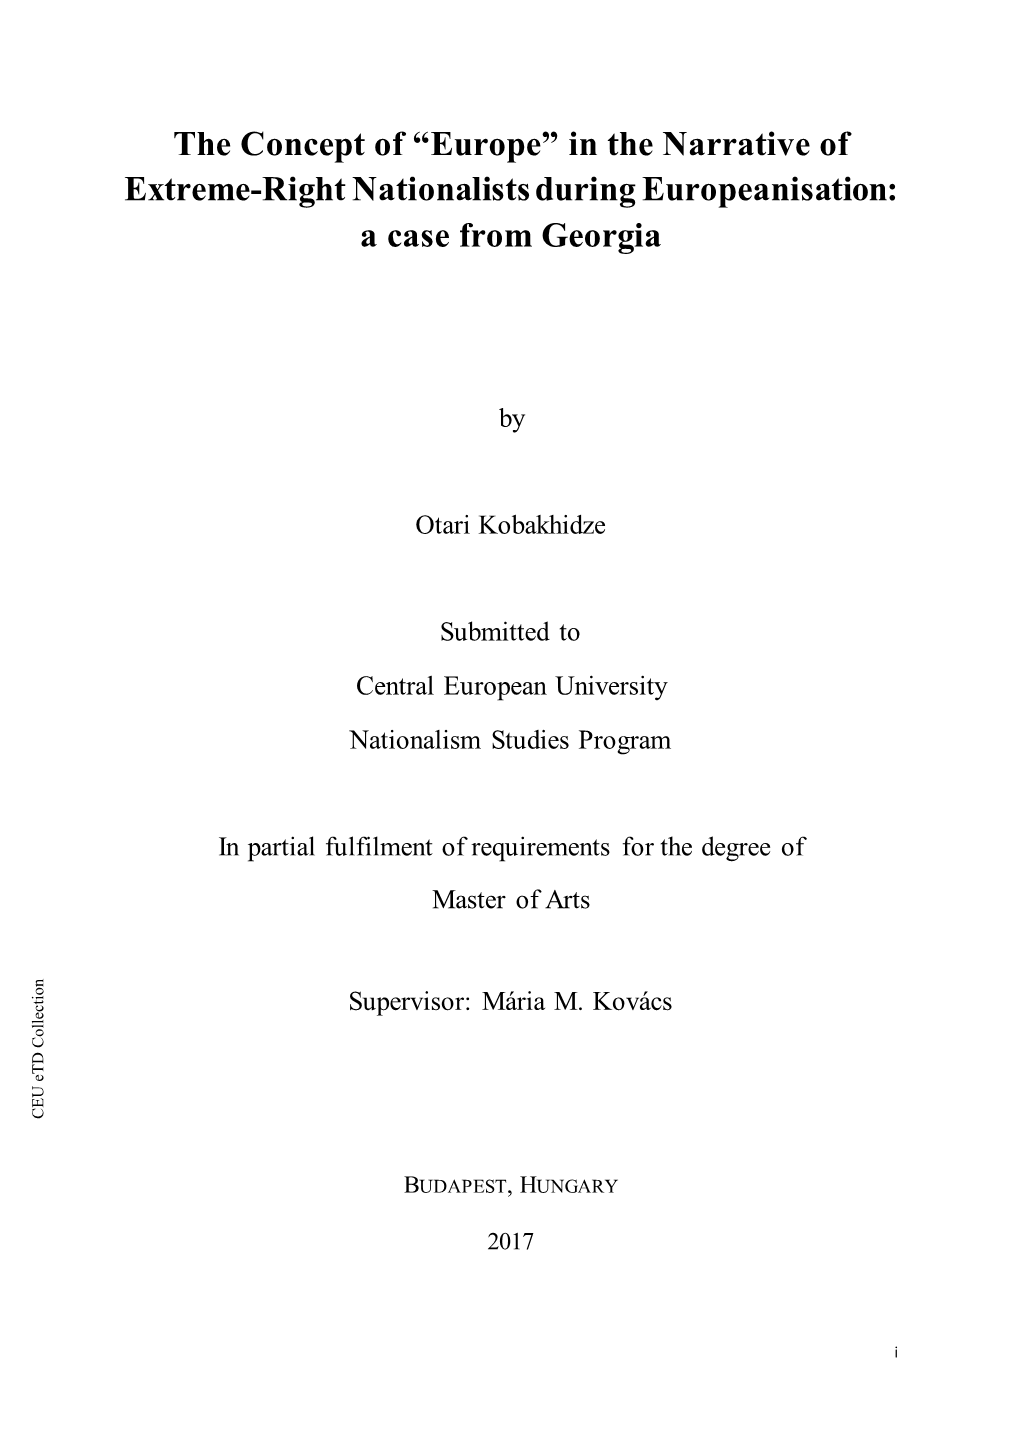 In the Narrative of Extreme-Right Nationalists During Europeanisation: a Case from Georgia